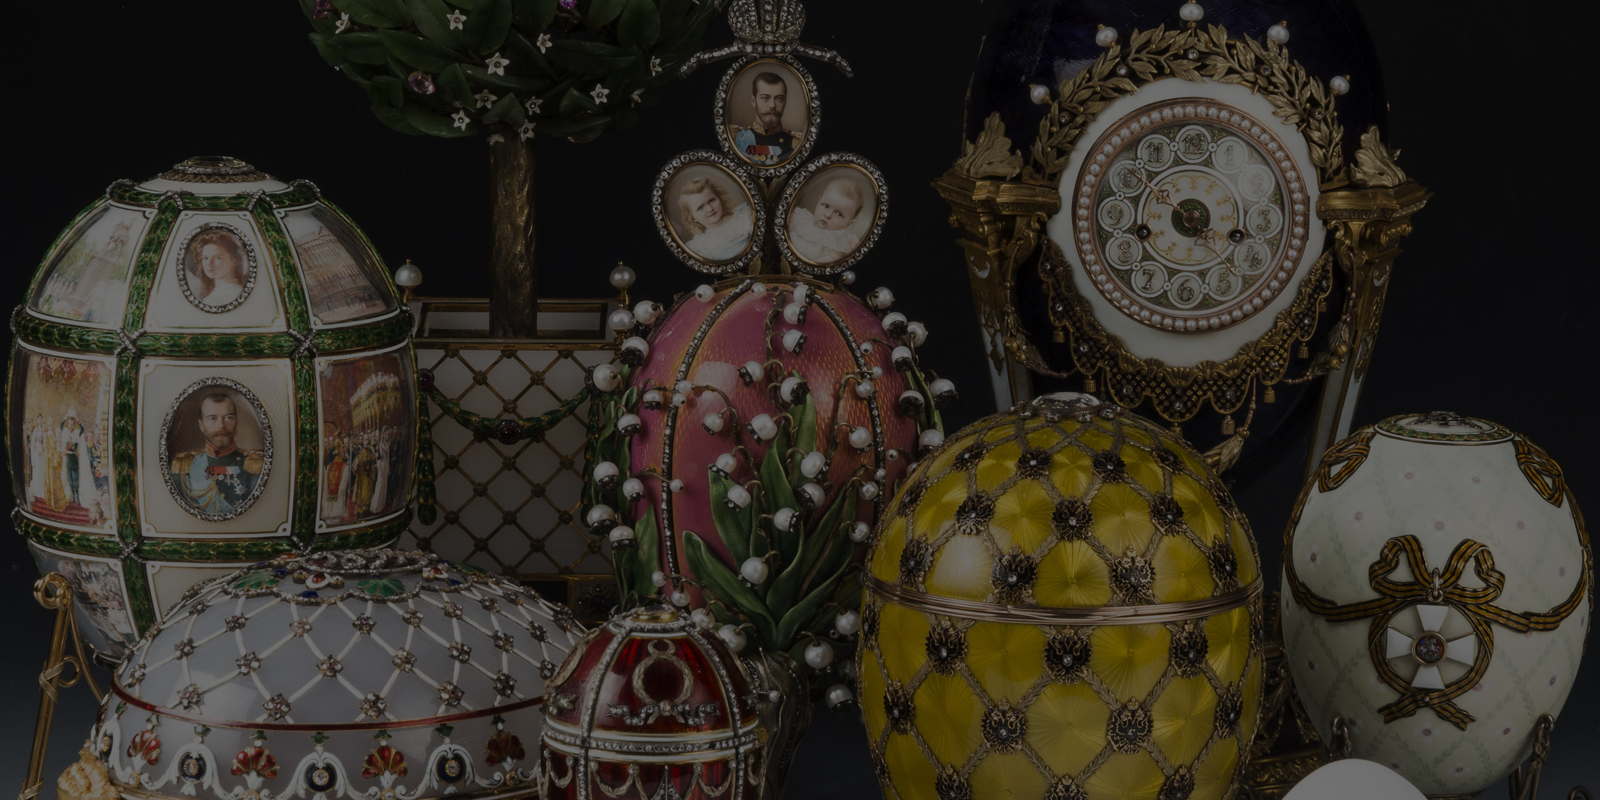 Fabergé Collection Bought by Russian For a Return Home